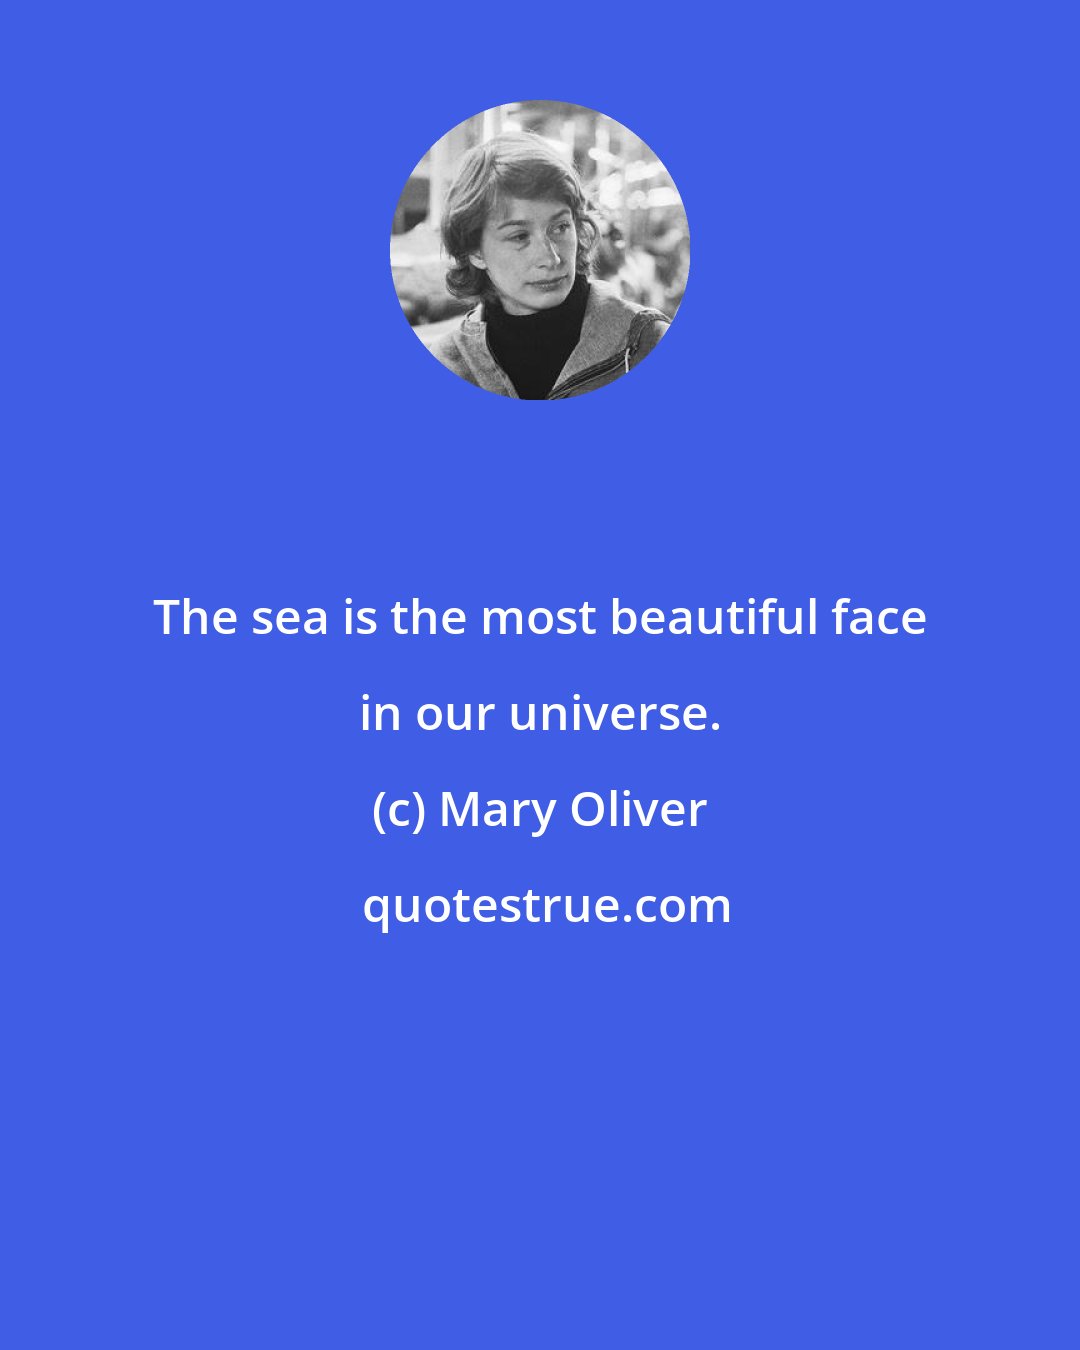 Mary Oliver: The sea is the most beautiful face in our universe.